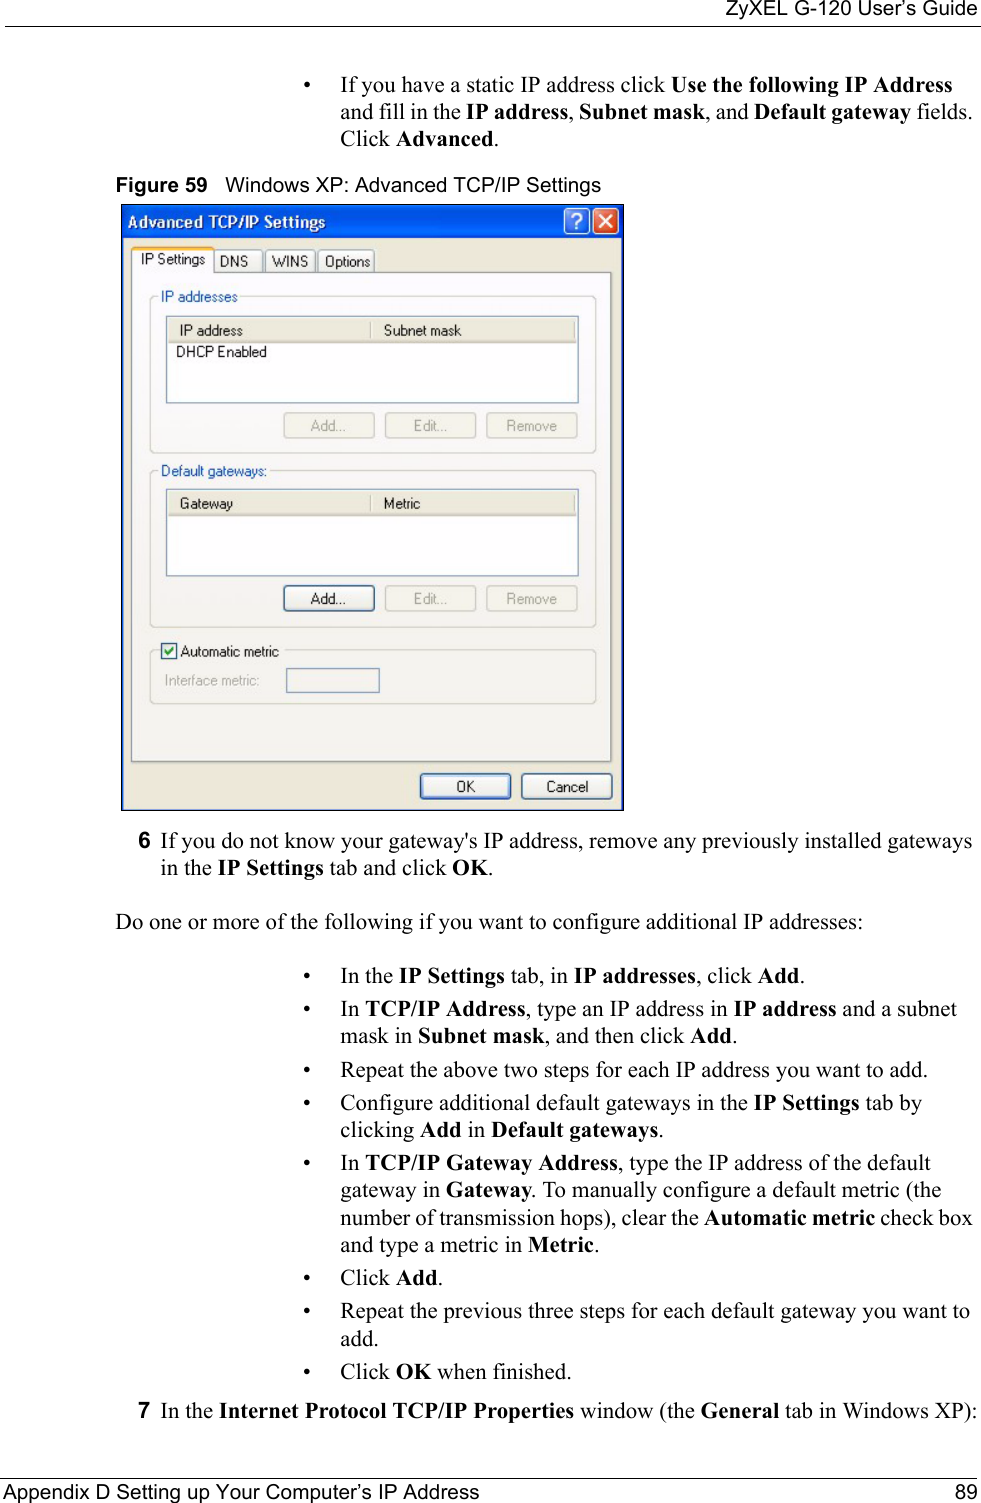 ZyXEL G-120 User’s GuideAppendix D Setting up Your Computer’s IP Address 89• If you have a static IP address click Use the following IP Address and fill in the IP address, Subnet mask, and Default gateway fields. Click Advanced.Figure 59   Windows XP: Advanced TCP/IP Settings6If you do not know your gateway&apos;s IP address, remove any previously installed gateways in the IP Settings tab and click OK.Do one or more of the following if you want to configure additional IP addresses:•In the IP Settings tab, in IP addresses, click Add.•In TCP/IP Address, type an IP address in IP address and a subnet mask in Subnet mask, and then click Add.• Repeat the above two steps for each IP address you want to add.• Configure additional default gateways in the IP Settings tab by clicking Add in Default gateways.•In TCP/IP Gateway Address, type the IP address of the default gateway in Gateway. To manually configure a default metric (the number of transmission hops), clear the Automatic metric check box and type a metric in Metric.• Click Add. • Repeat the previous three steps for each default gateway you want to add.• Click OK when finished.7In the Internet Protocol TCP/IP Properties window (the General tab in Windows XP):